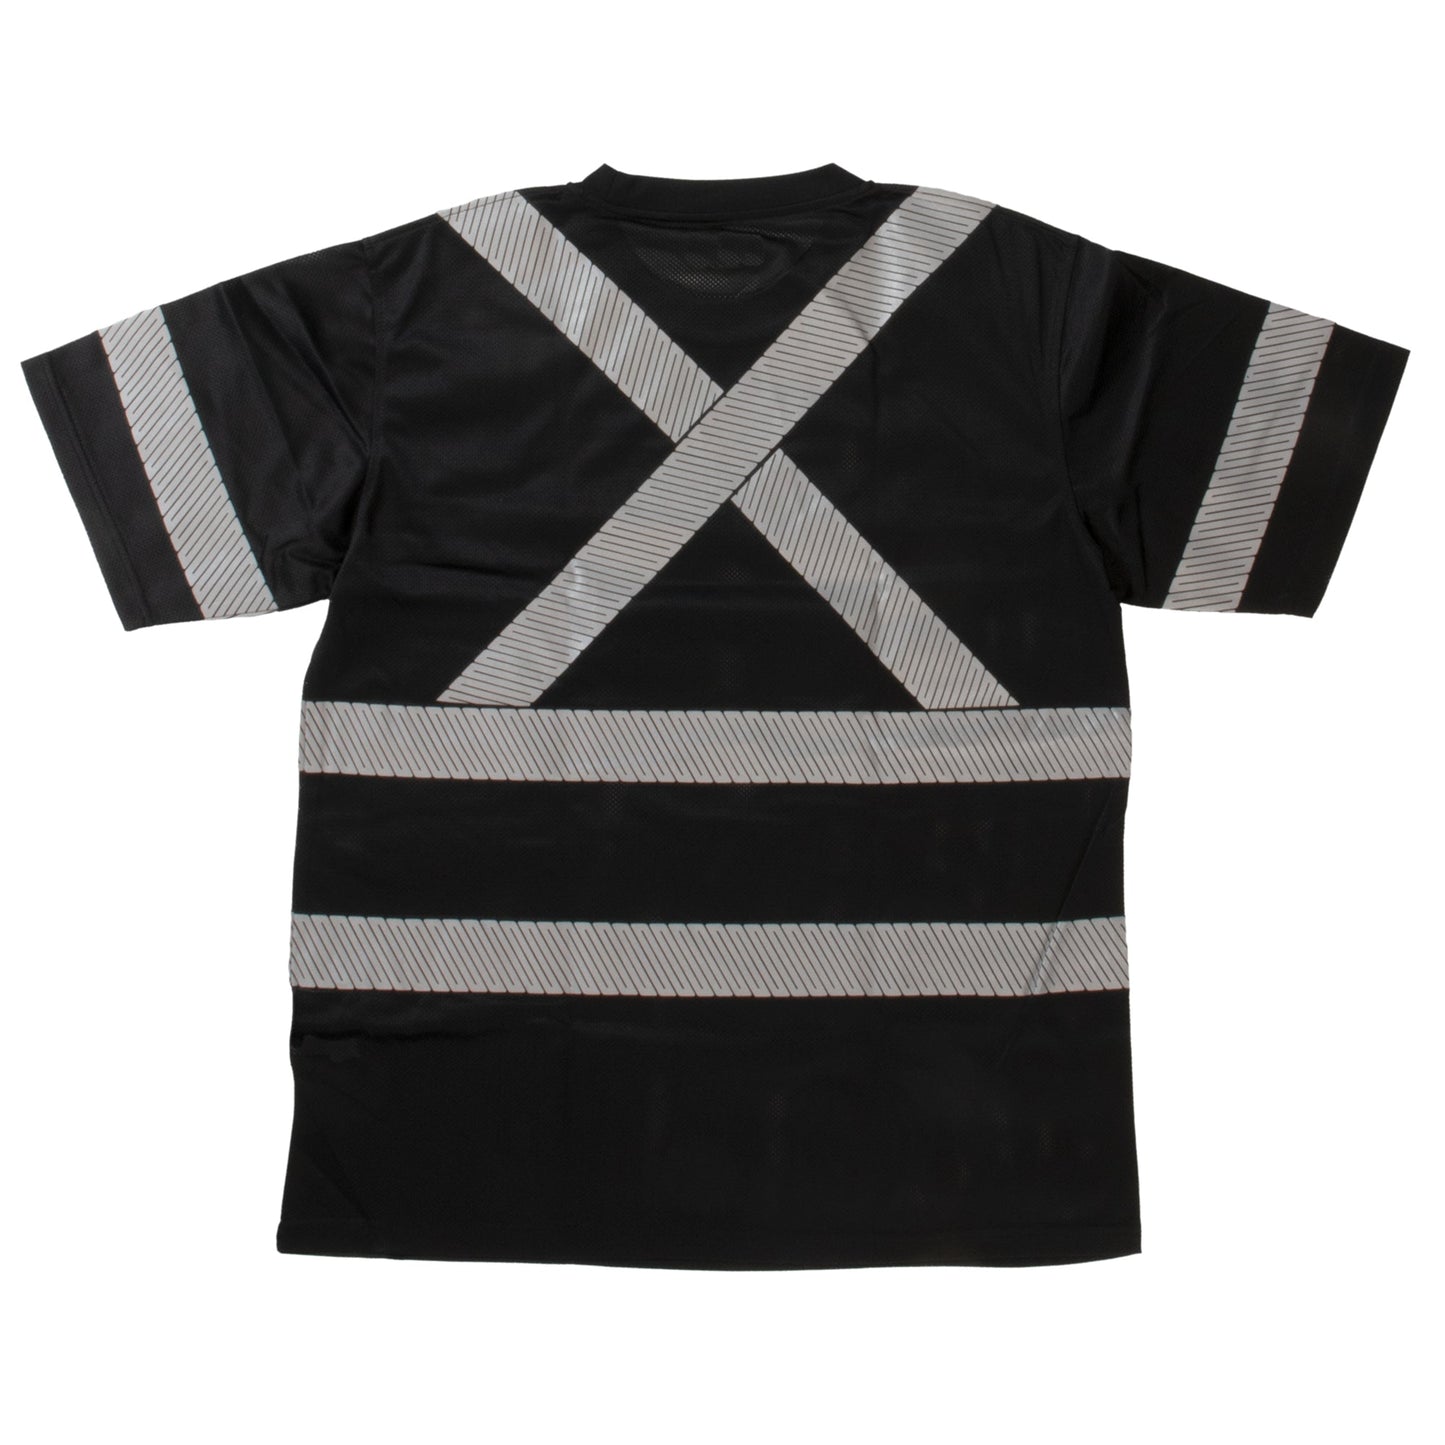 ST07 S/S Safety T-Shirt with Segmented Stripes